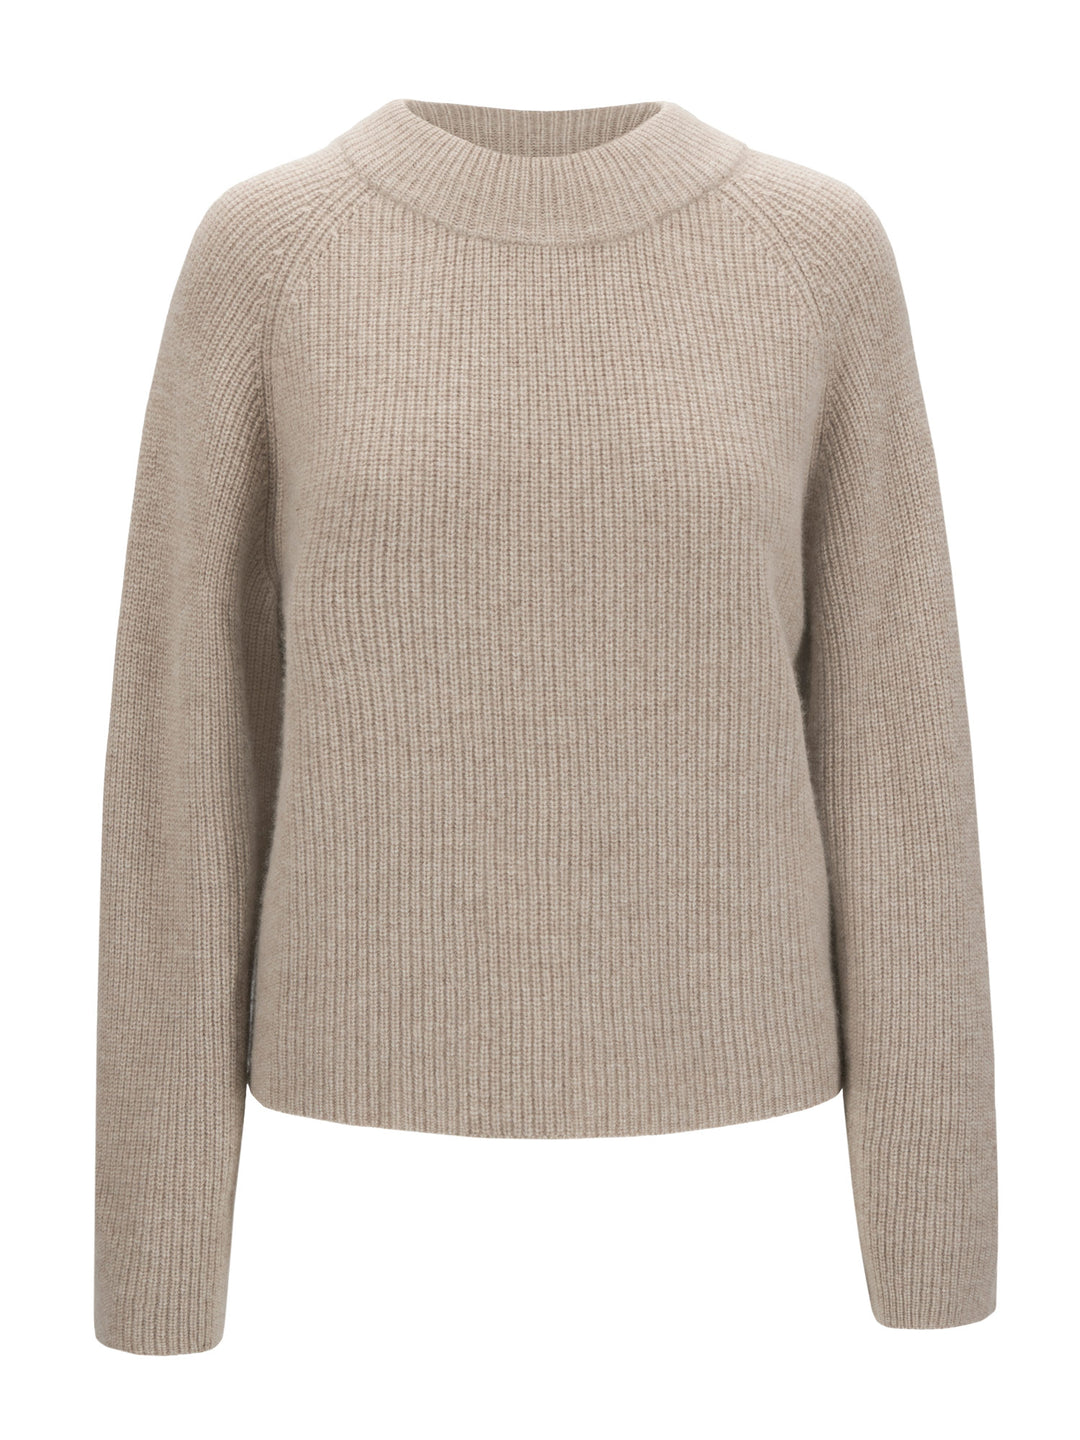 Rib knitted cashmere sweater "Idun" in 100% pure cashmere. Scandinavian design by Kashmina. Color: Toast.